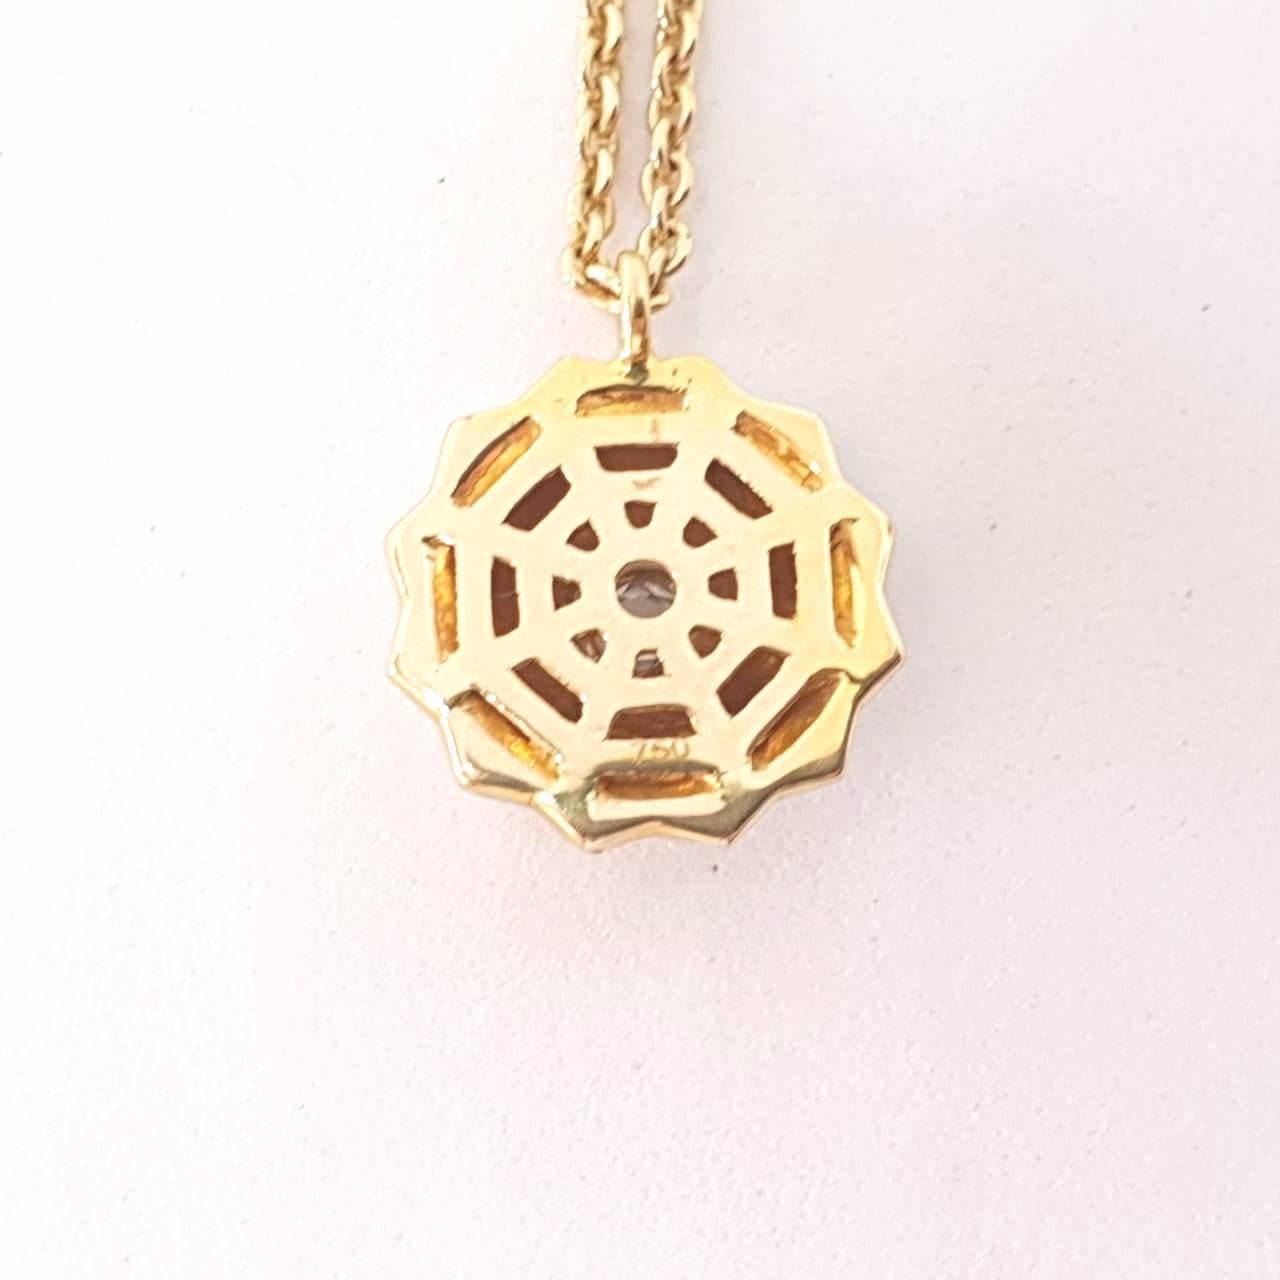 Depicting the circle of life, this day wear pendant necklace is made in 18 Karat Yellow Gold & studded with 1 centre round shape rose cut diamond. 
The hand texture, the backplate & the diamond rings in the chain add to the detail in this pendant